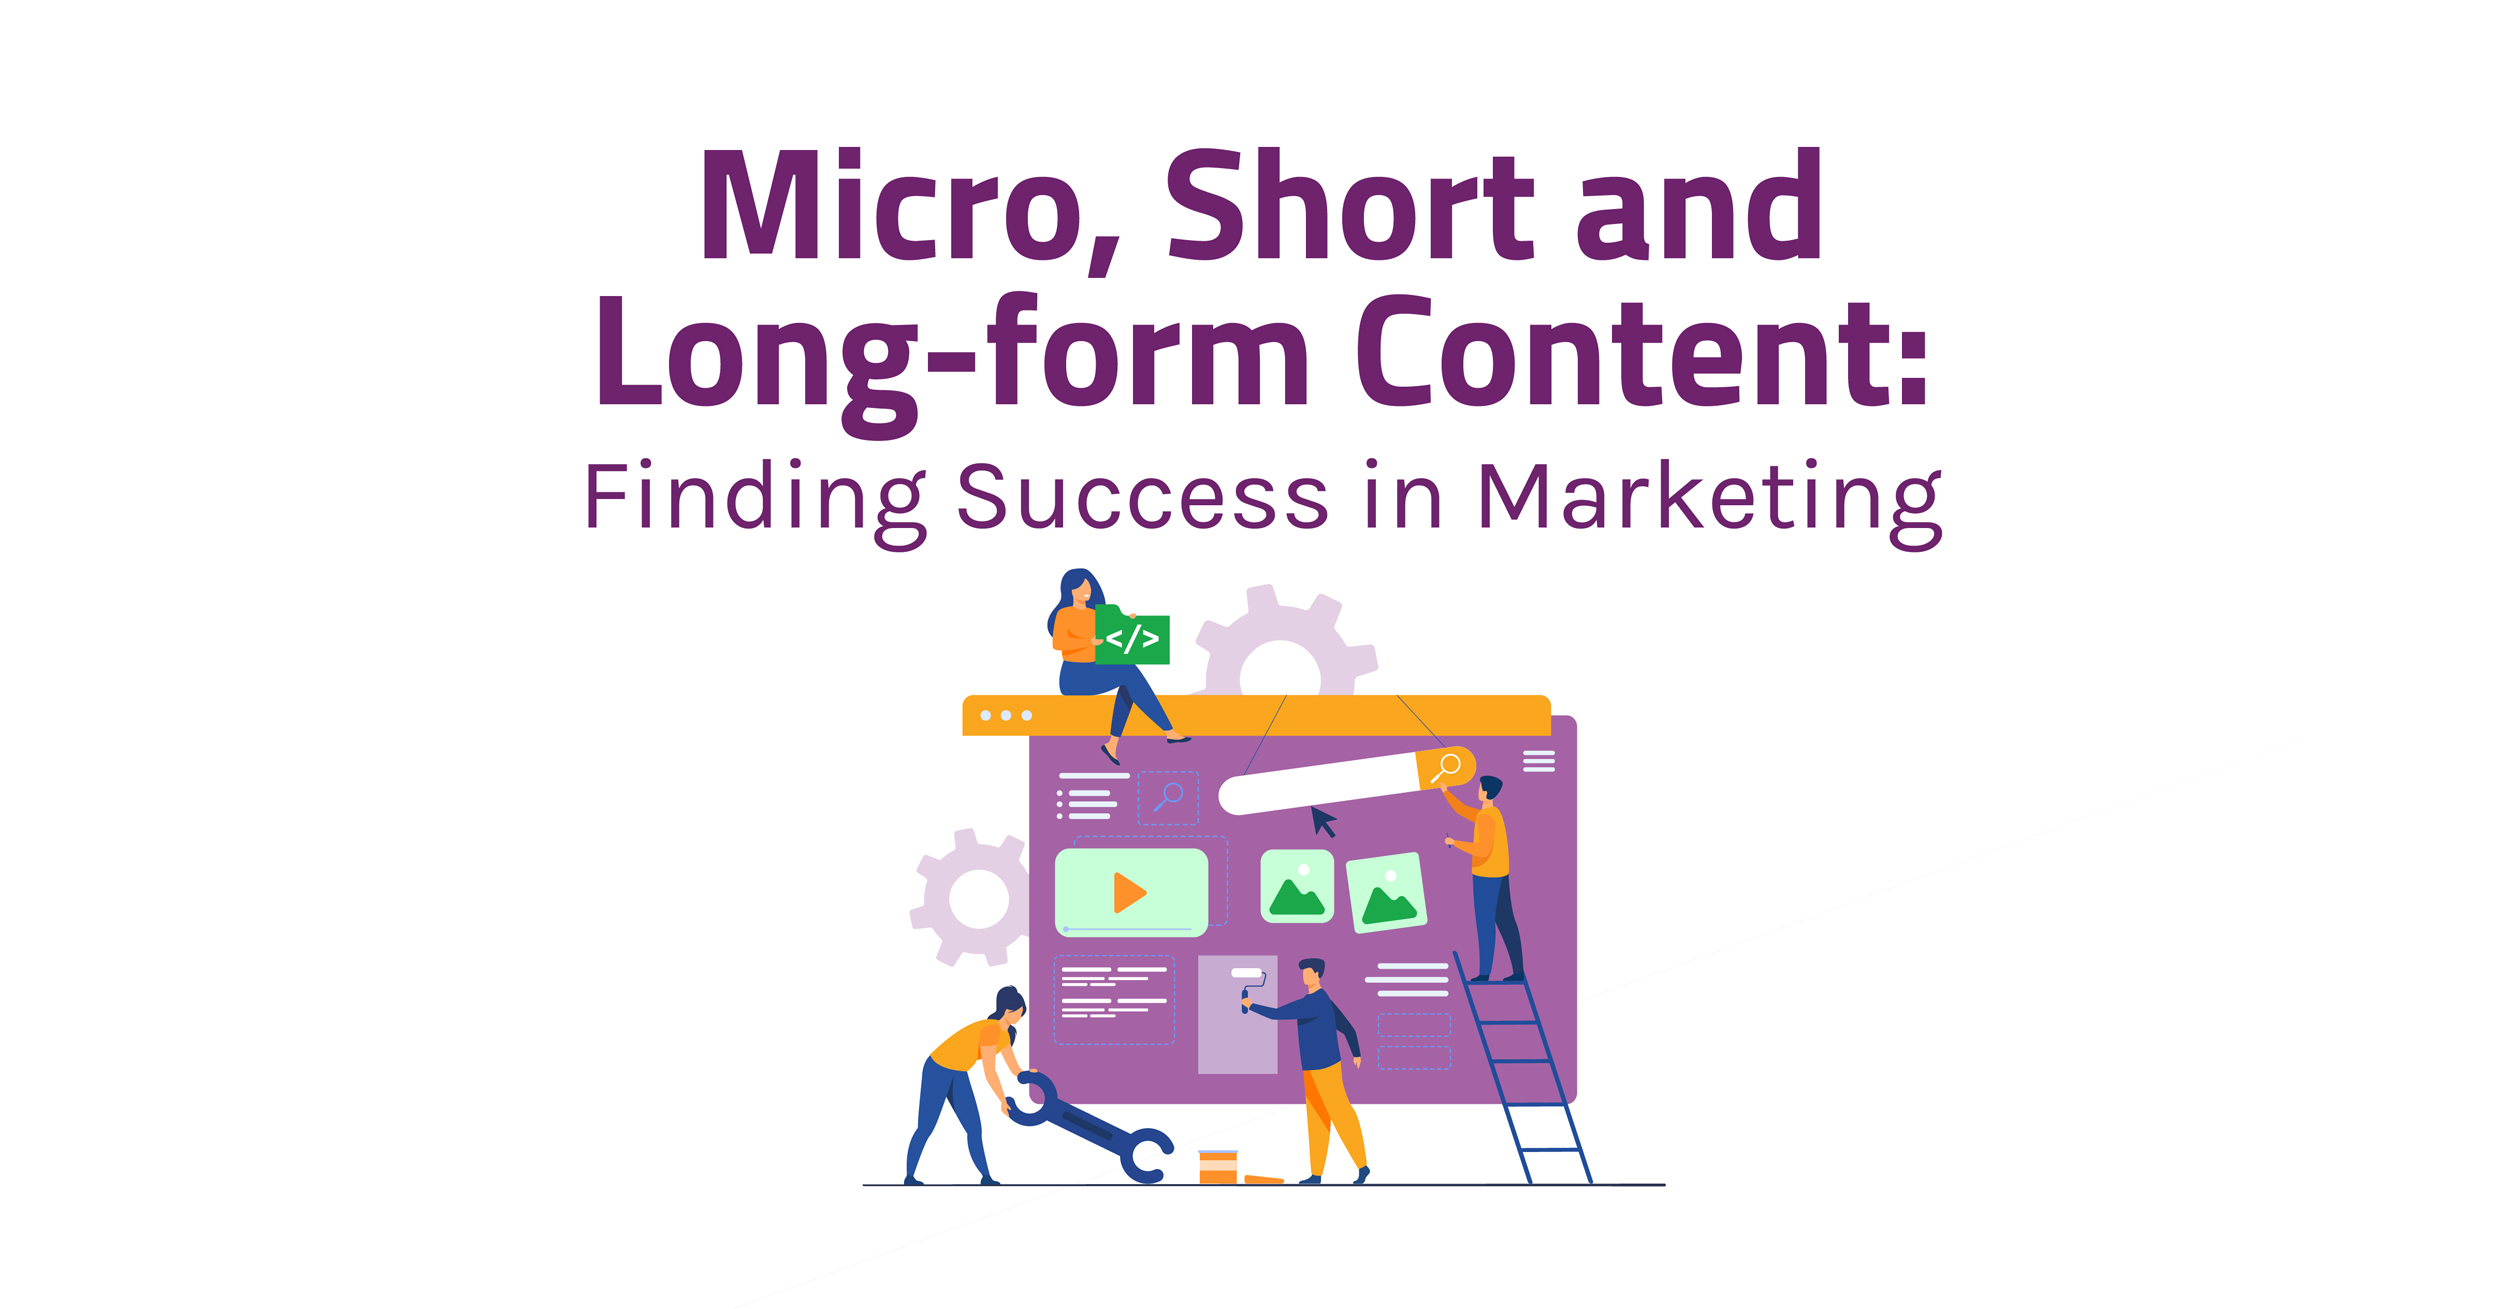 Micro, Short and Long-form Content: Finding Success in Marketing